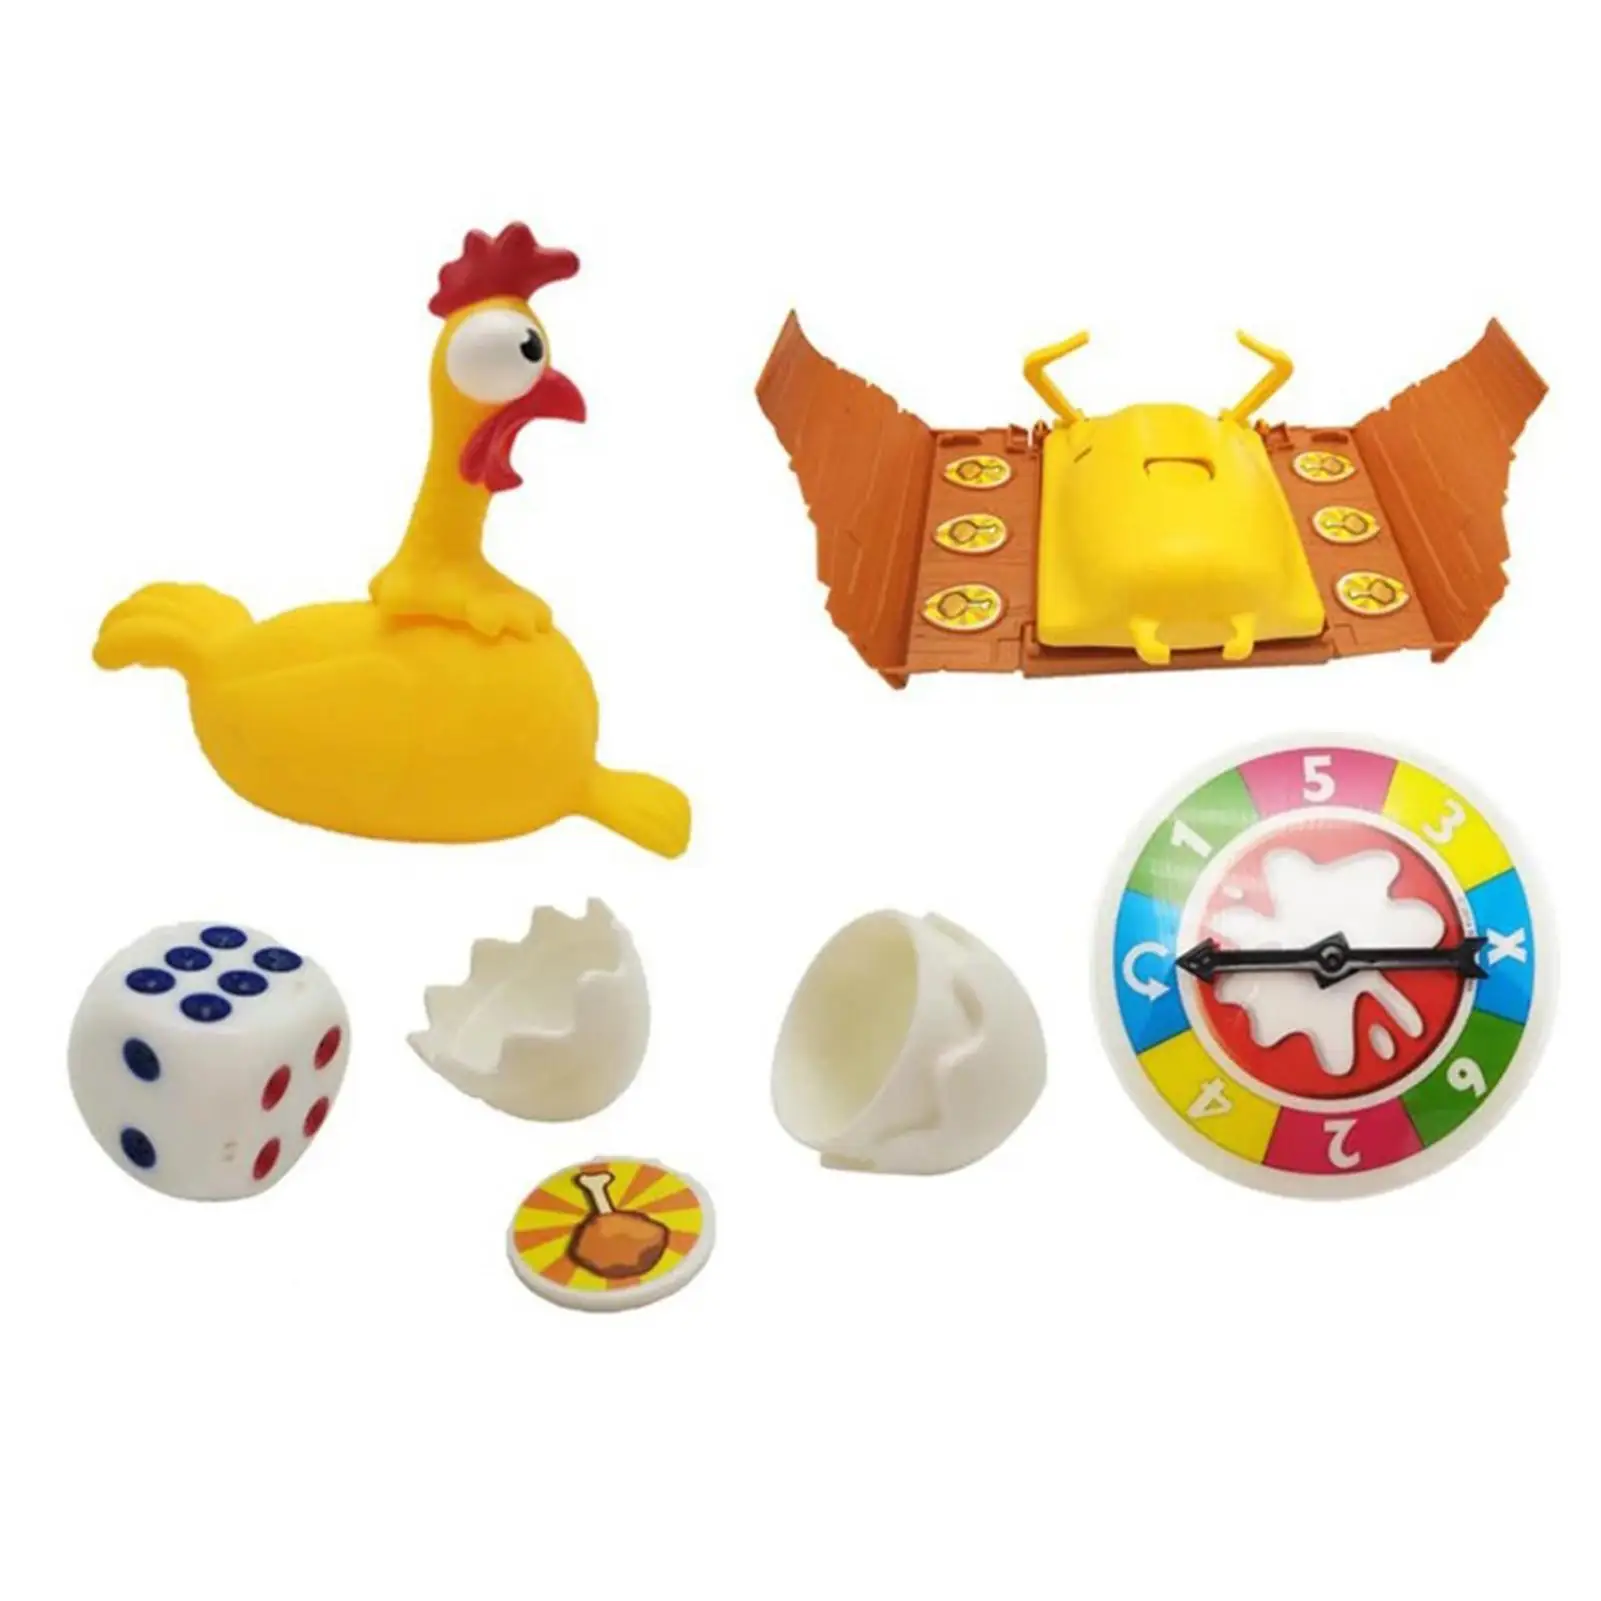 

Squeeze Chicken Egg Laying Hens Anti Stress Toy For Kids Adult Halloween Gifts Tabletop Game Tricky Funny Gadgets Party Prank